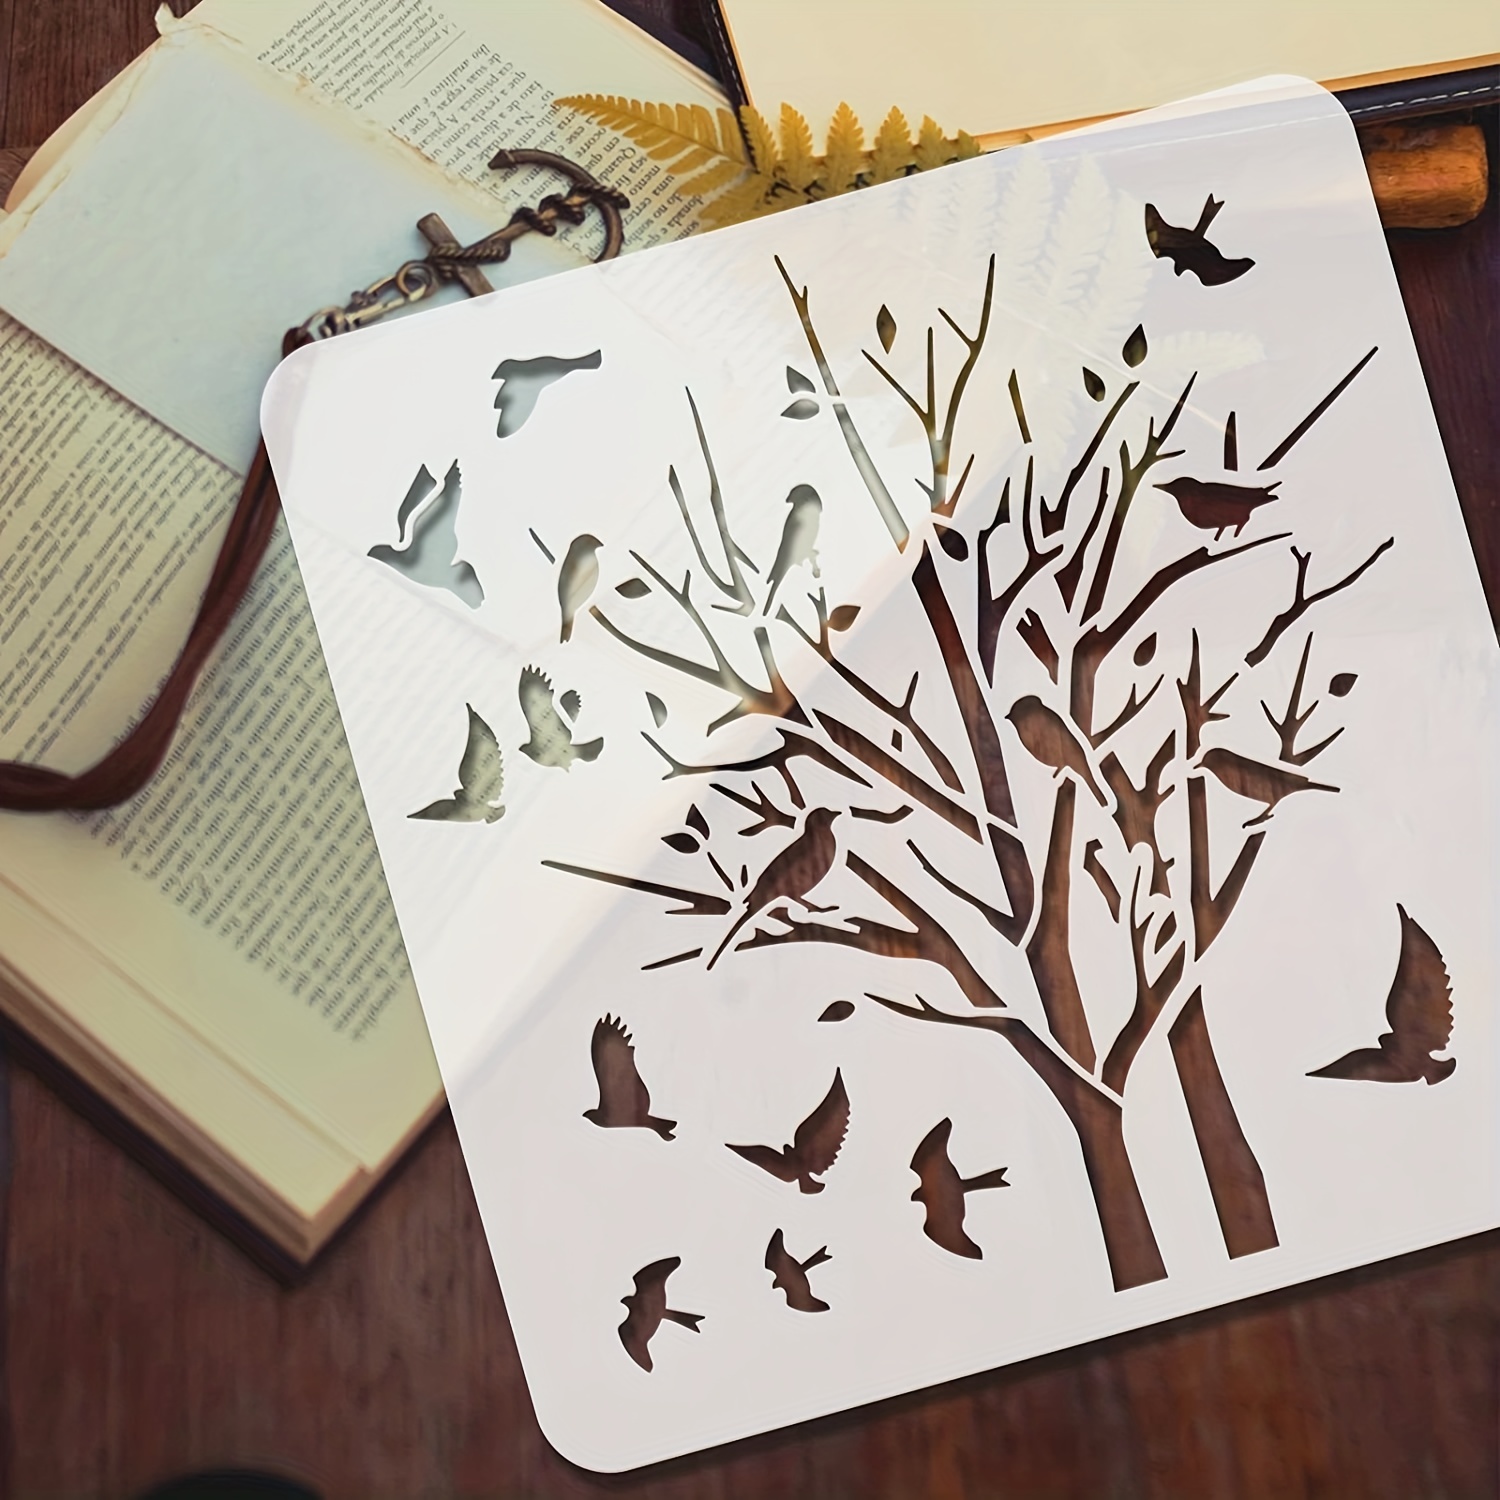 10pcs Reusable Tree Stencils For Painting, Branches Stencils Natural Plants  Templates For DIY Wall Furniture Crafts And Decorations